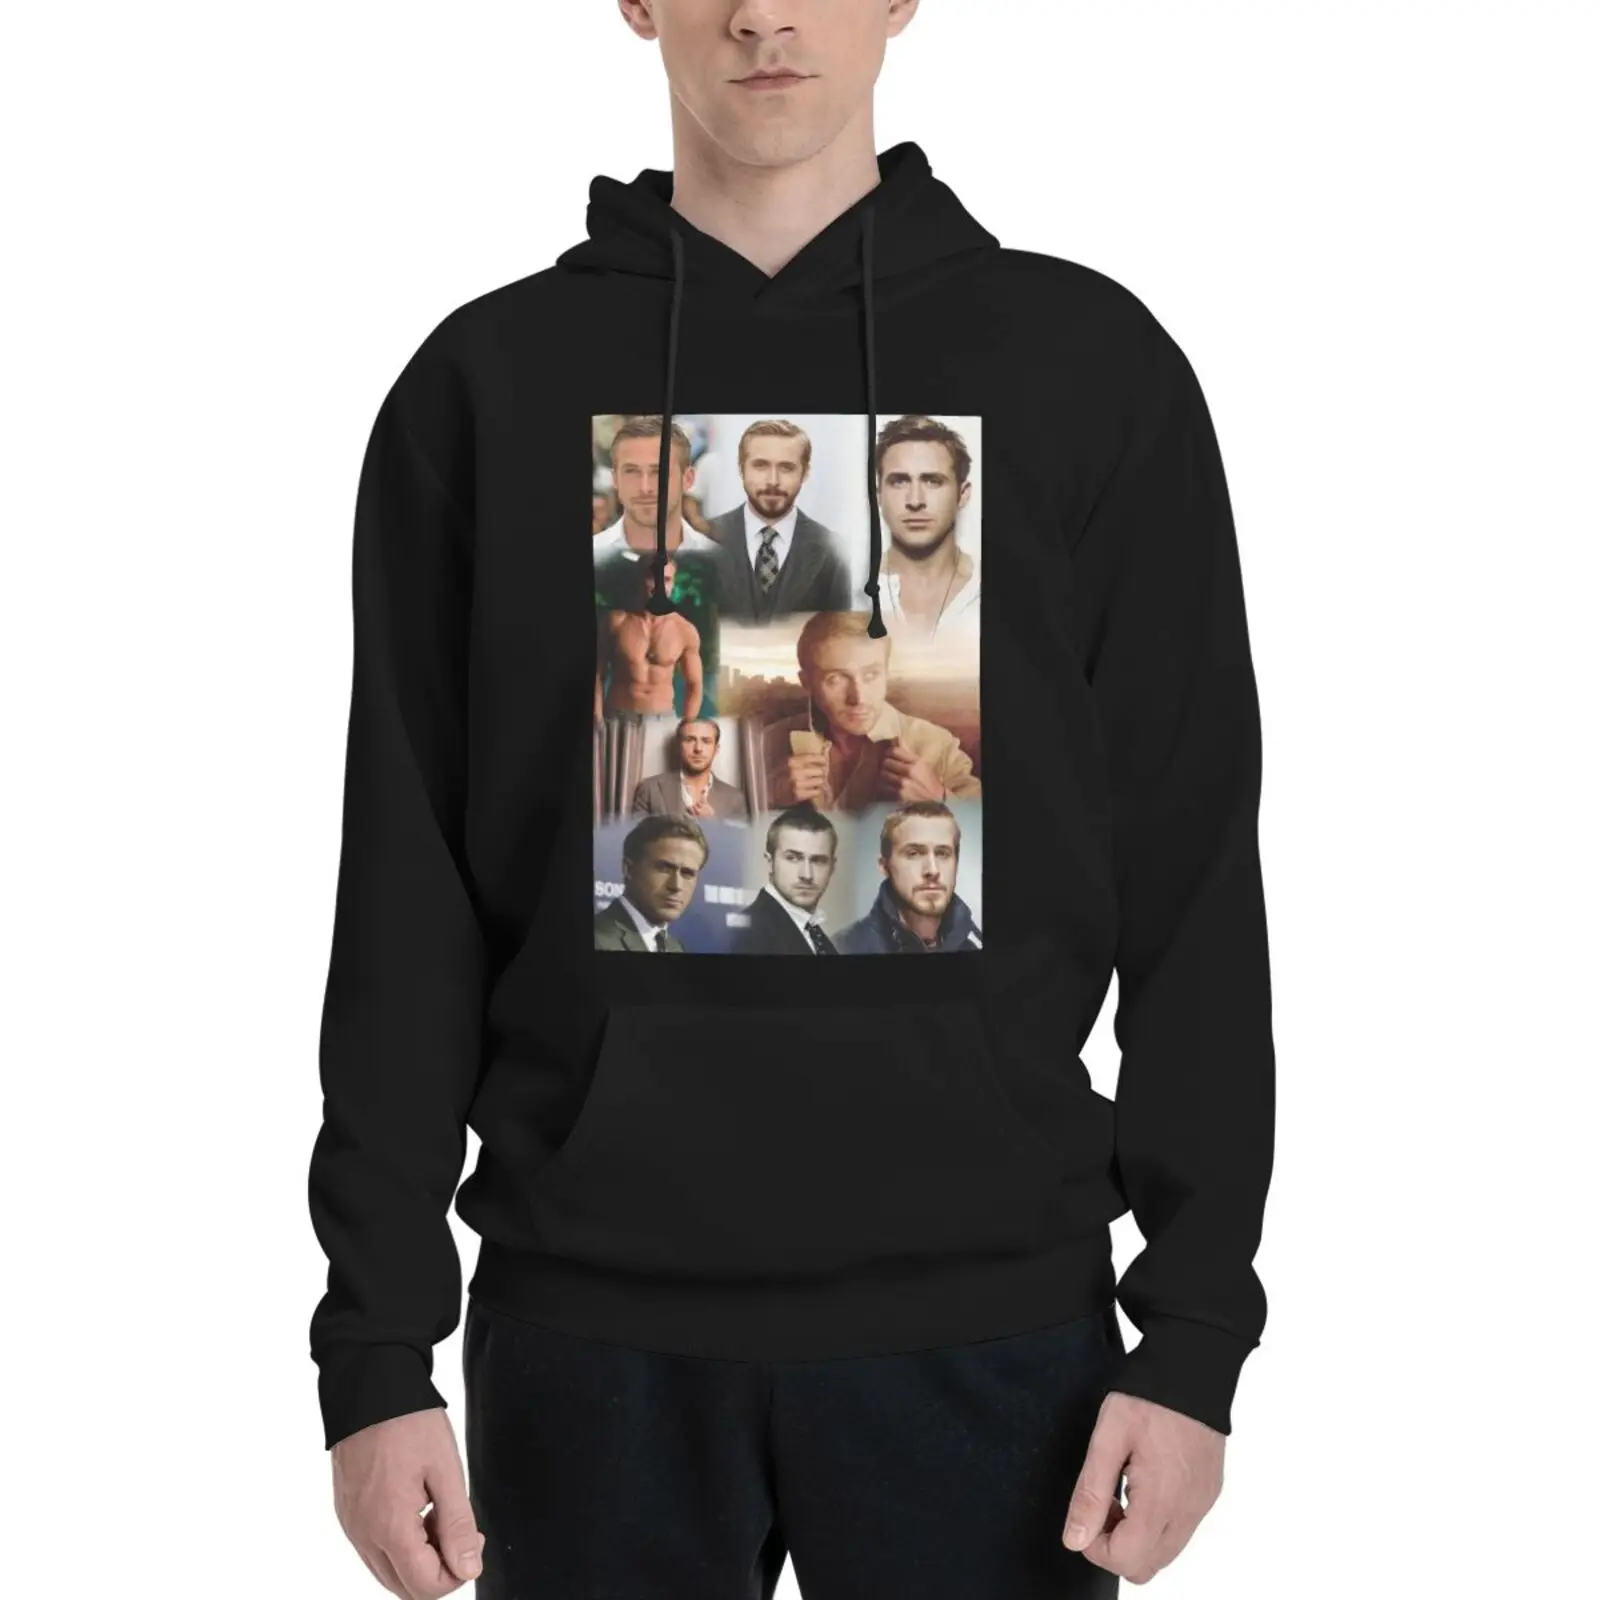 

Ryan Gosling 3355 Hooded Sweatshirts Hooded Zip-Up Men Sets Sweatshirt Anime Male Clothes Clothes For Teenagers Sweater Sweats